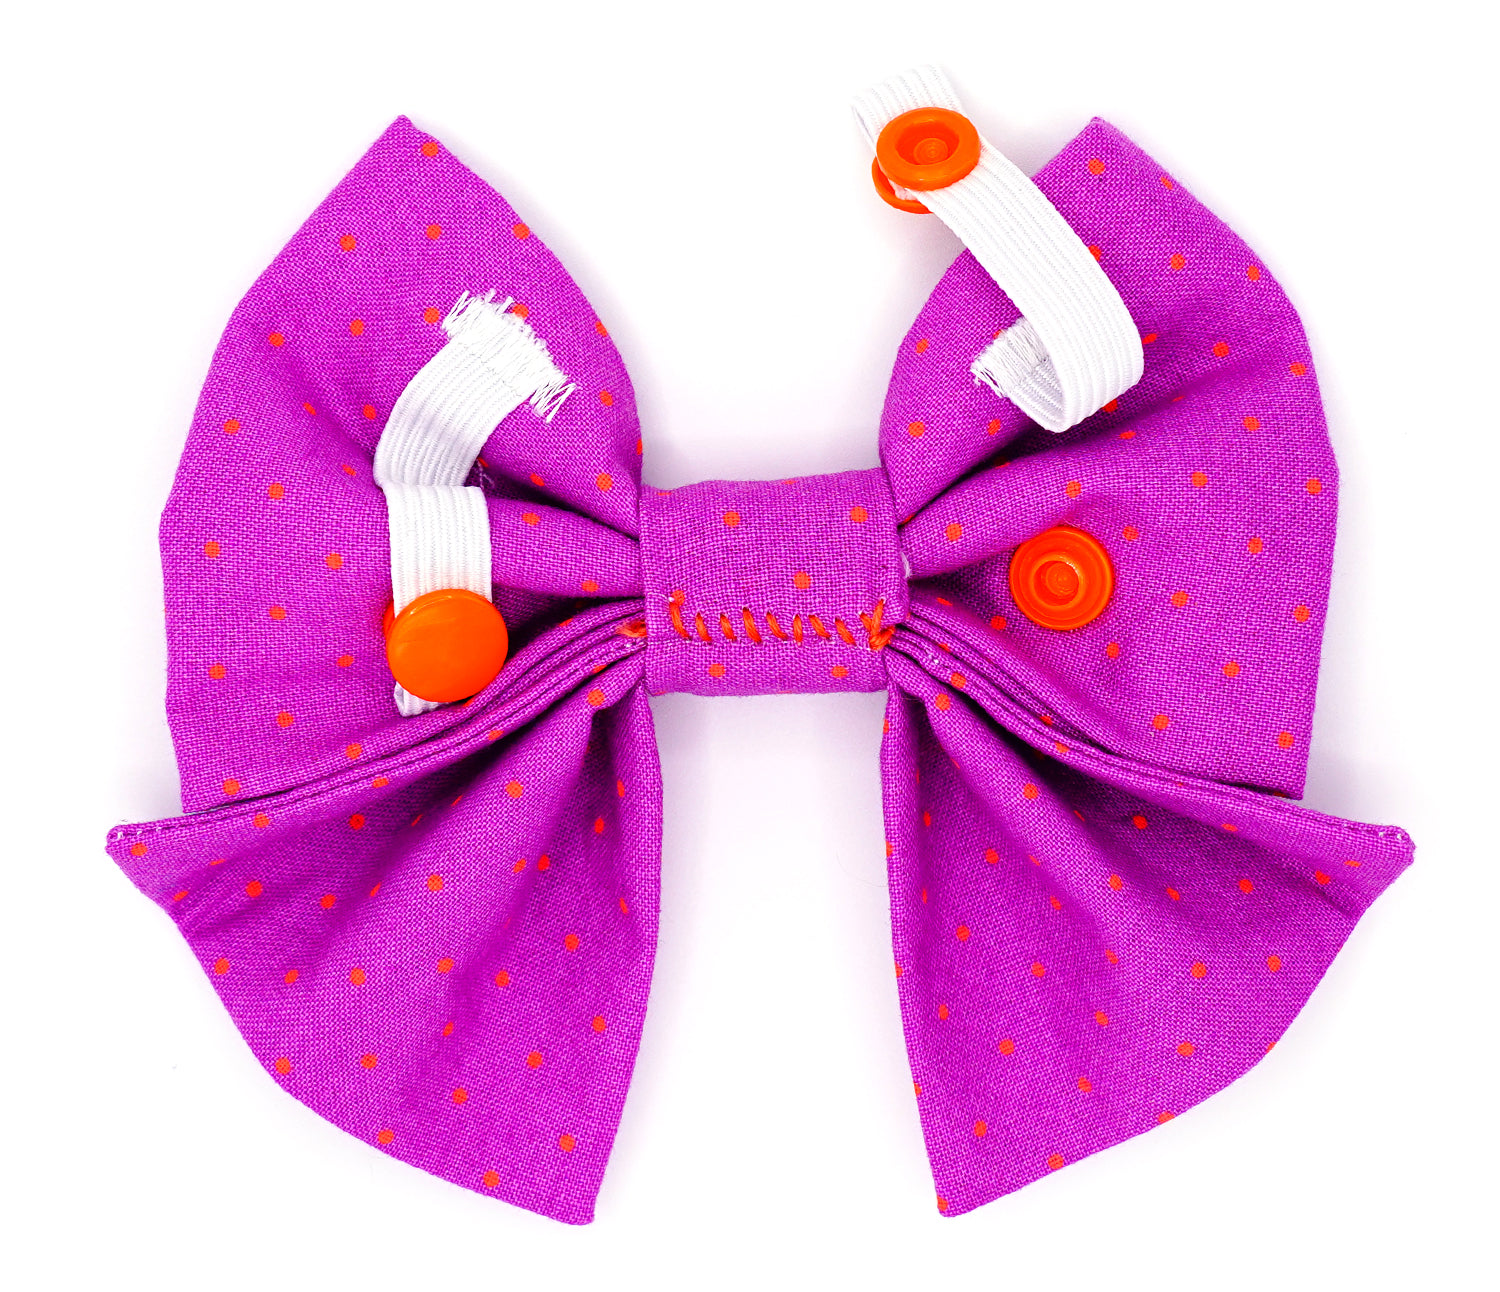 Handmade cotton bow tie with tails for dogs (or other pets). Elastic straps on back with snaps make it easy to add to collar, harness, or leash. Bright purple background with bright orange dots